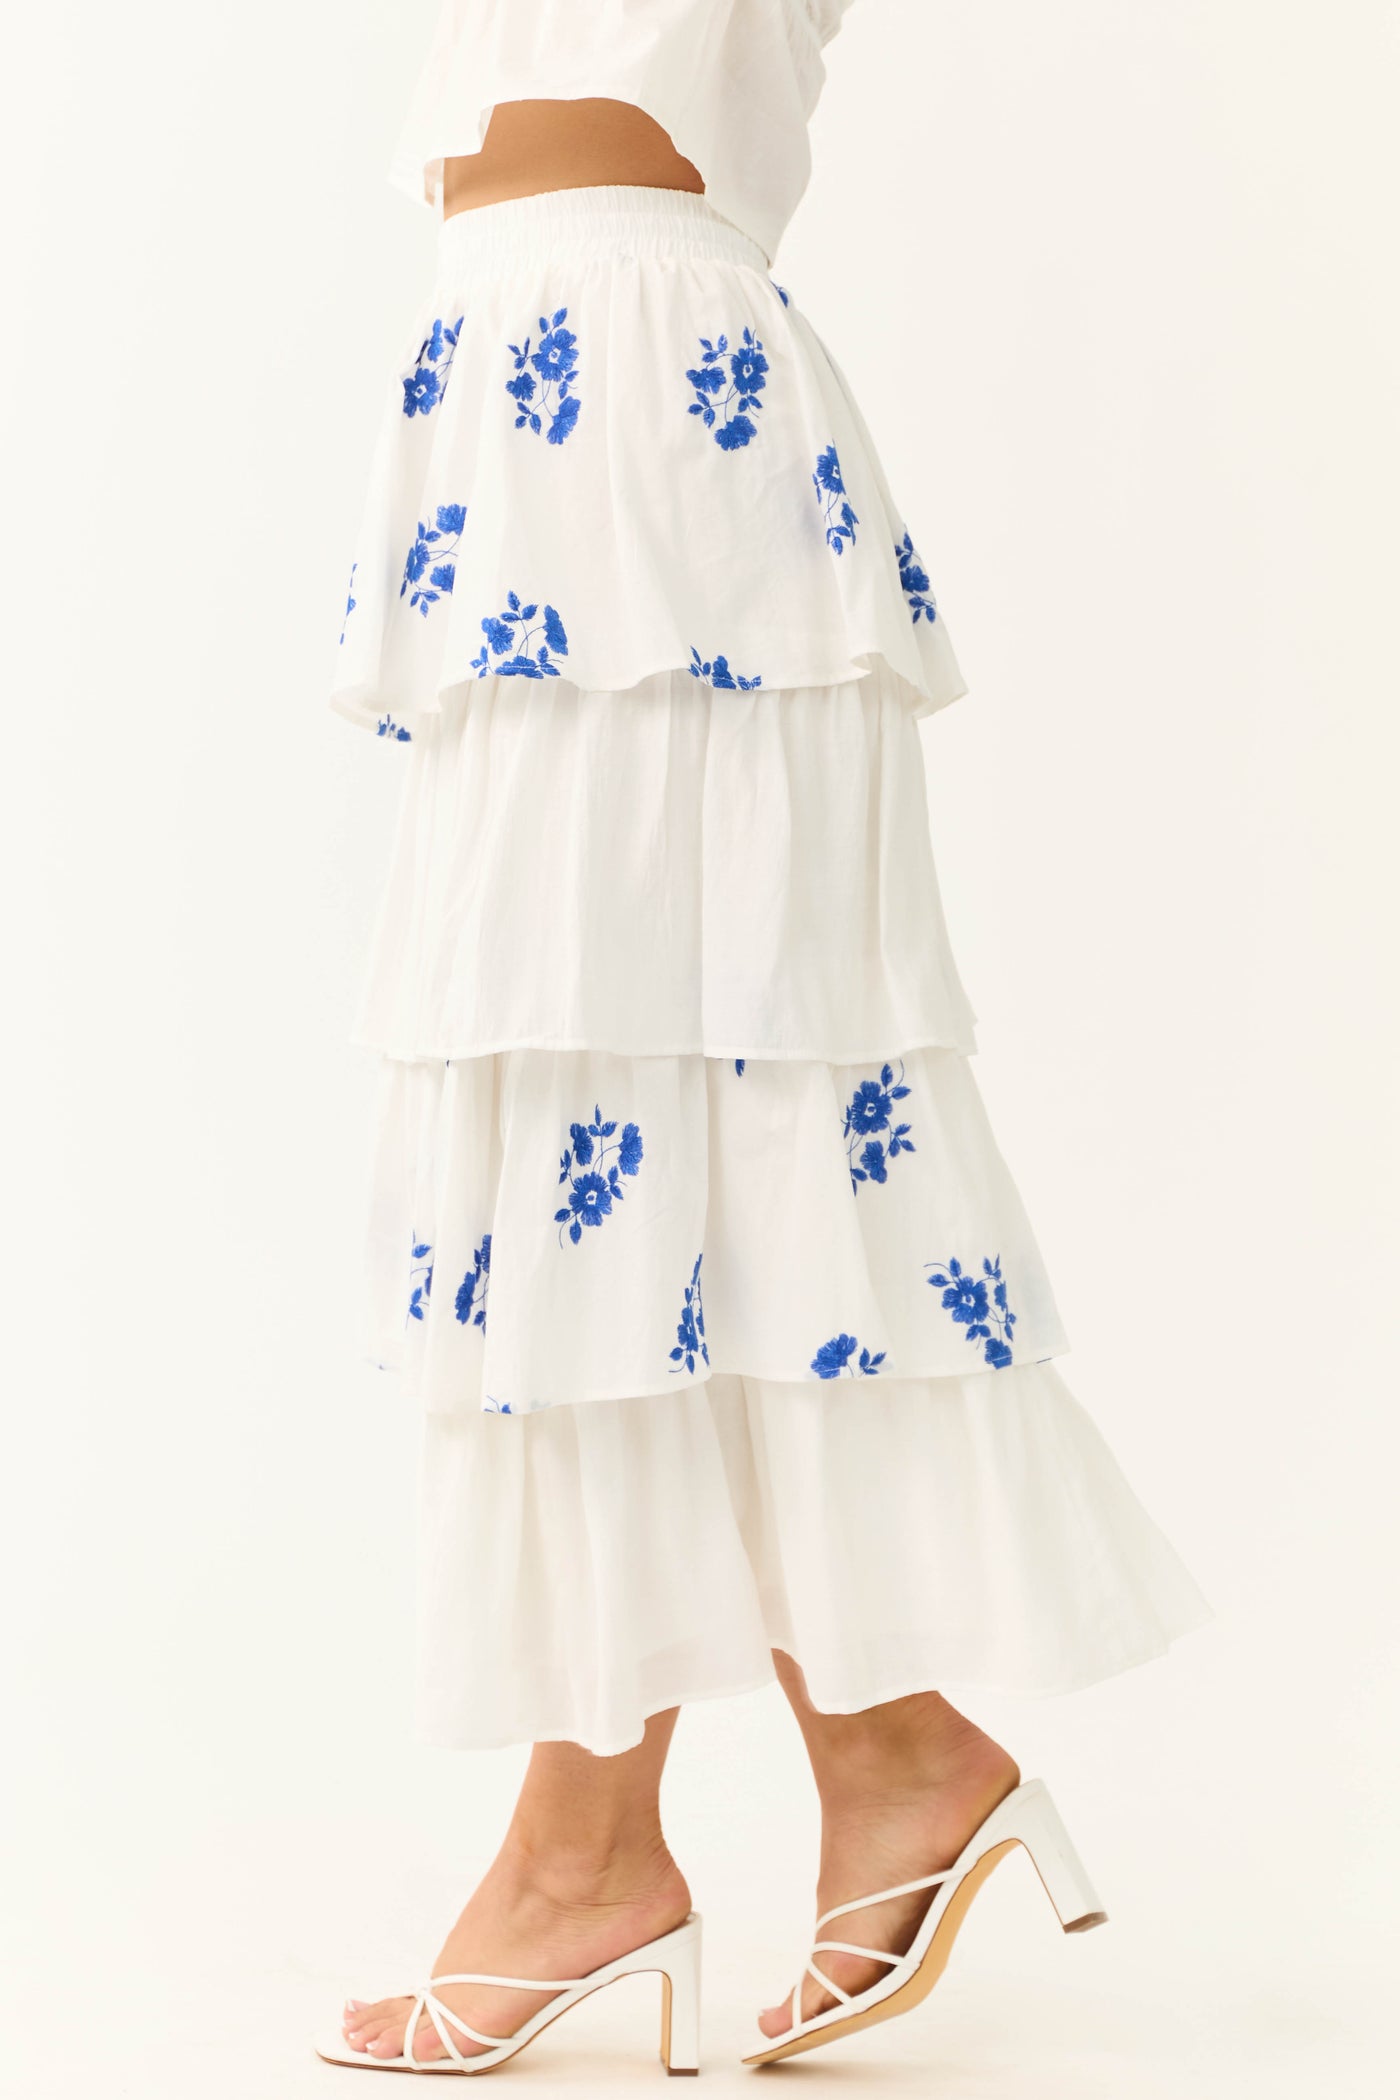 White and Cobalt Floral Embroidered Skirt